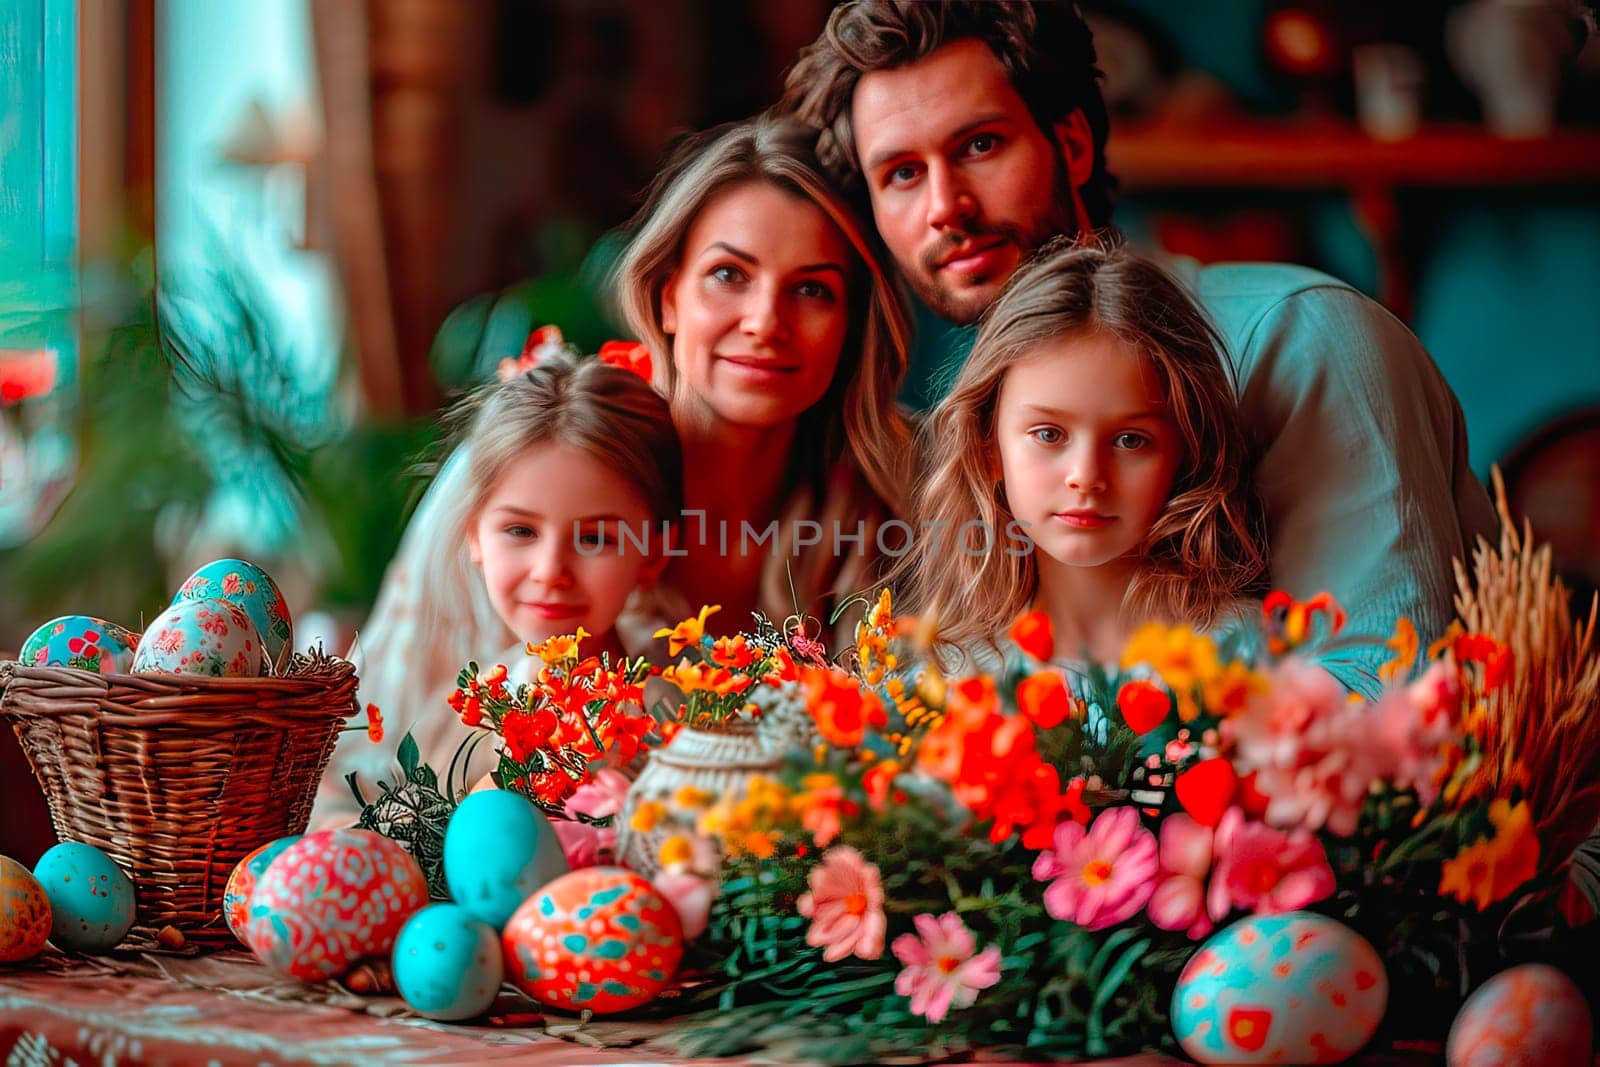 Easter centrepieces are visible in the foreground. Various flowers and colourful Easter eggs in different shades and sizes lie next to each other. In the back, four figures can be seen. A woman, a man and two children are smiling.